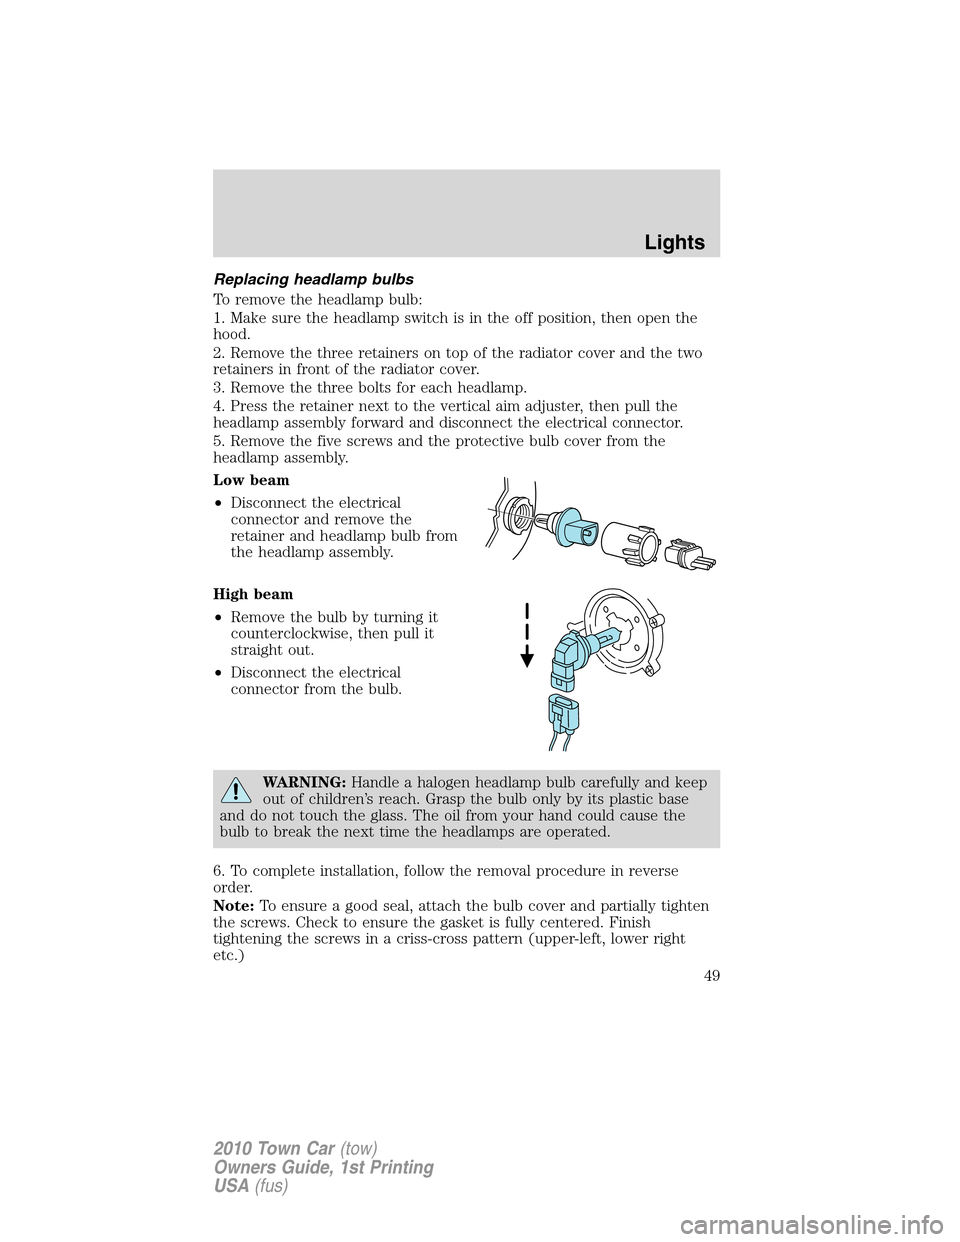 LINCOLN TOWN CAR 2010  Owners Manual Replacing headlamp bulbs
To remove the headlamp bulb:
1. Make sure the headlamp switch is in the off position, then open the
hood.
2. Remove the three retainers on top of the radiator cover and the tw